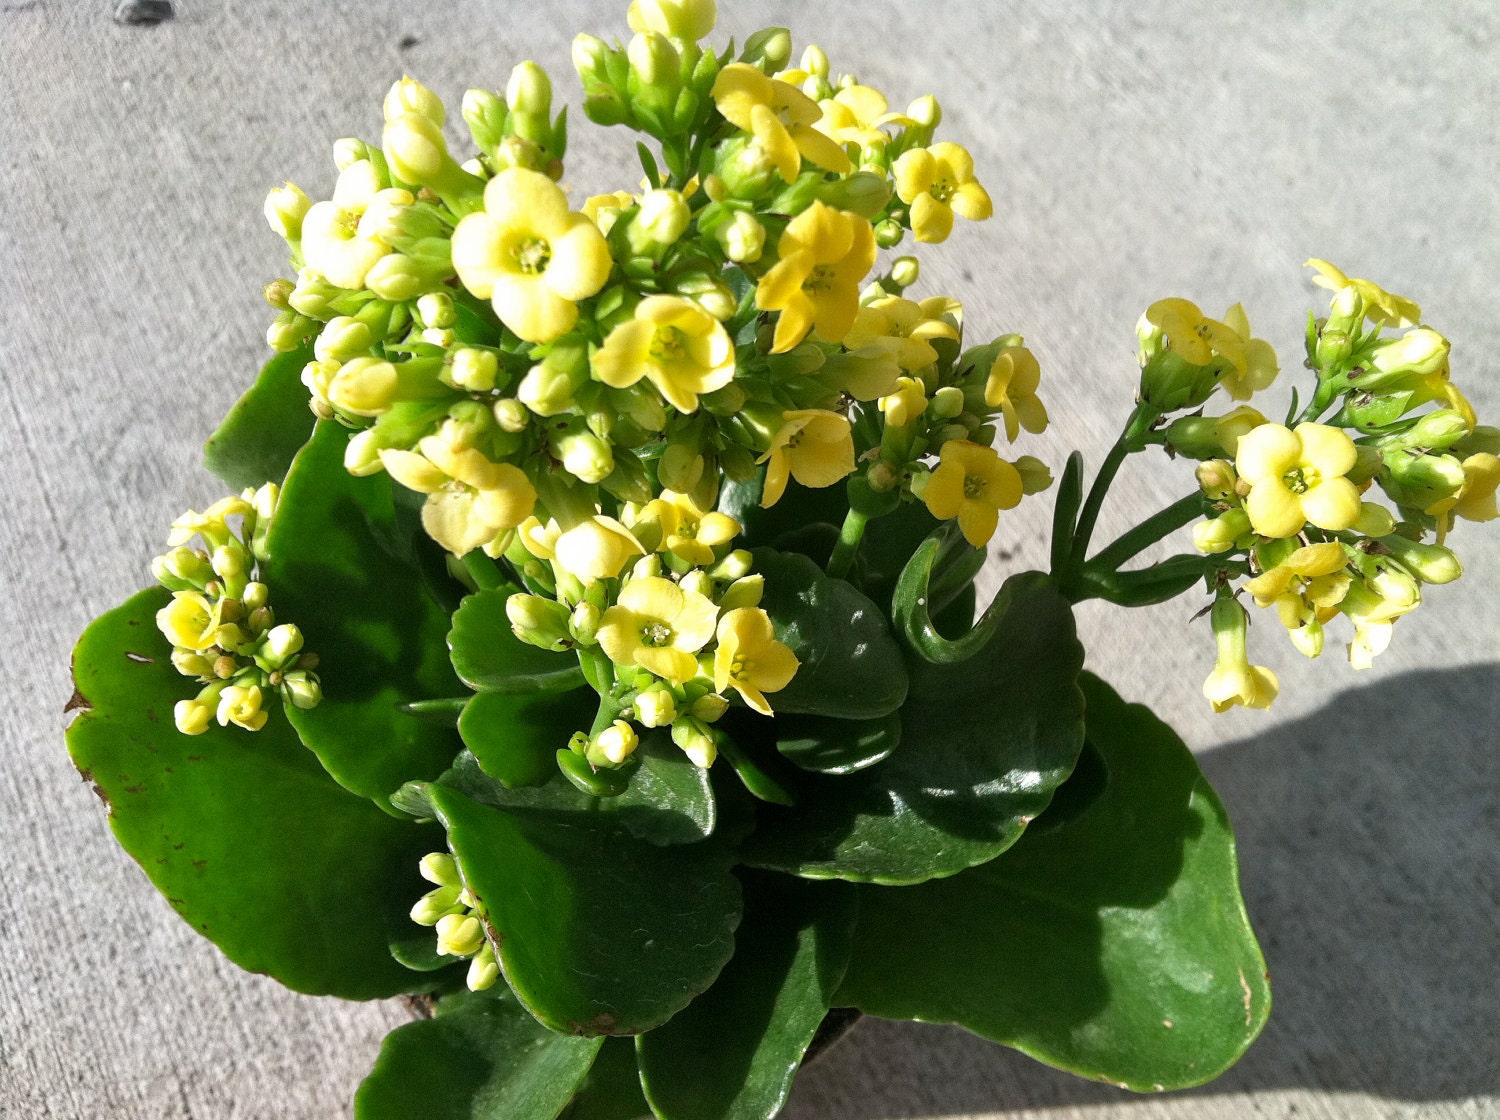 Blooming NOW Kalanchoe plants  with YELLOW flowers  by 